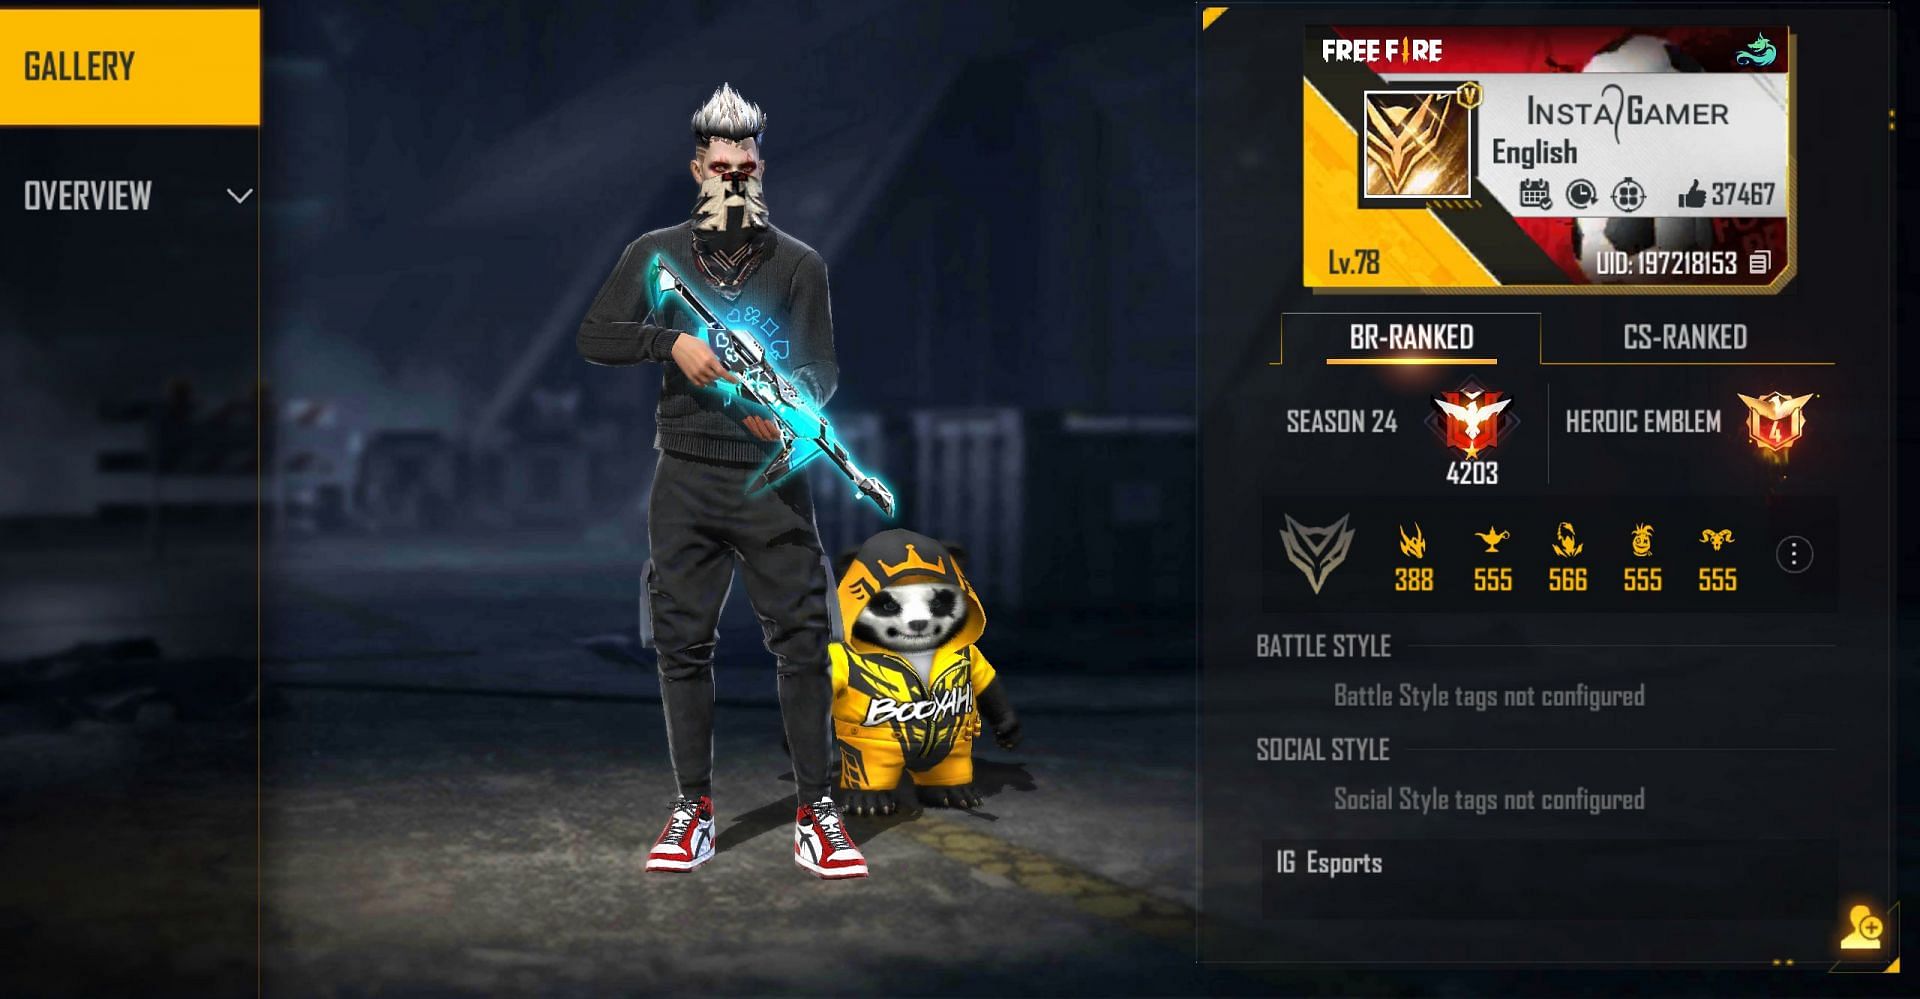 This is Insta Gamer&#039;s ID (Image via Free Fire)